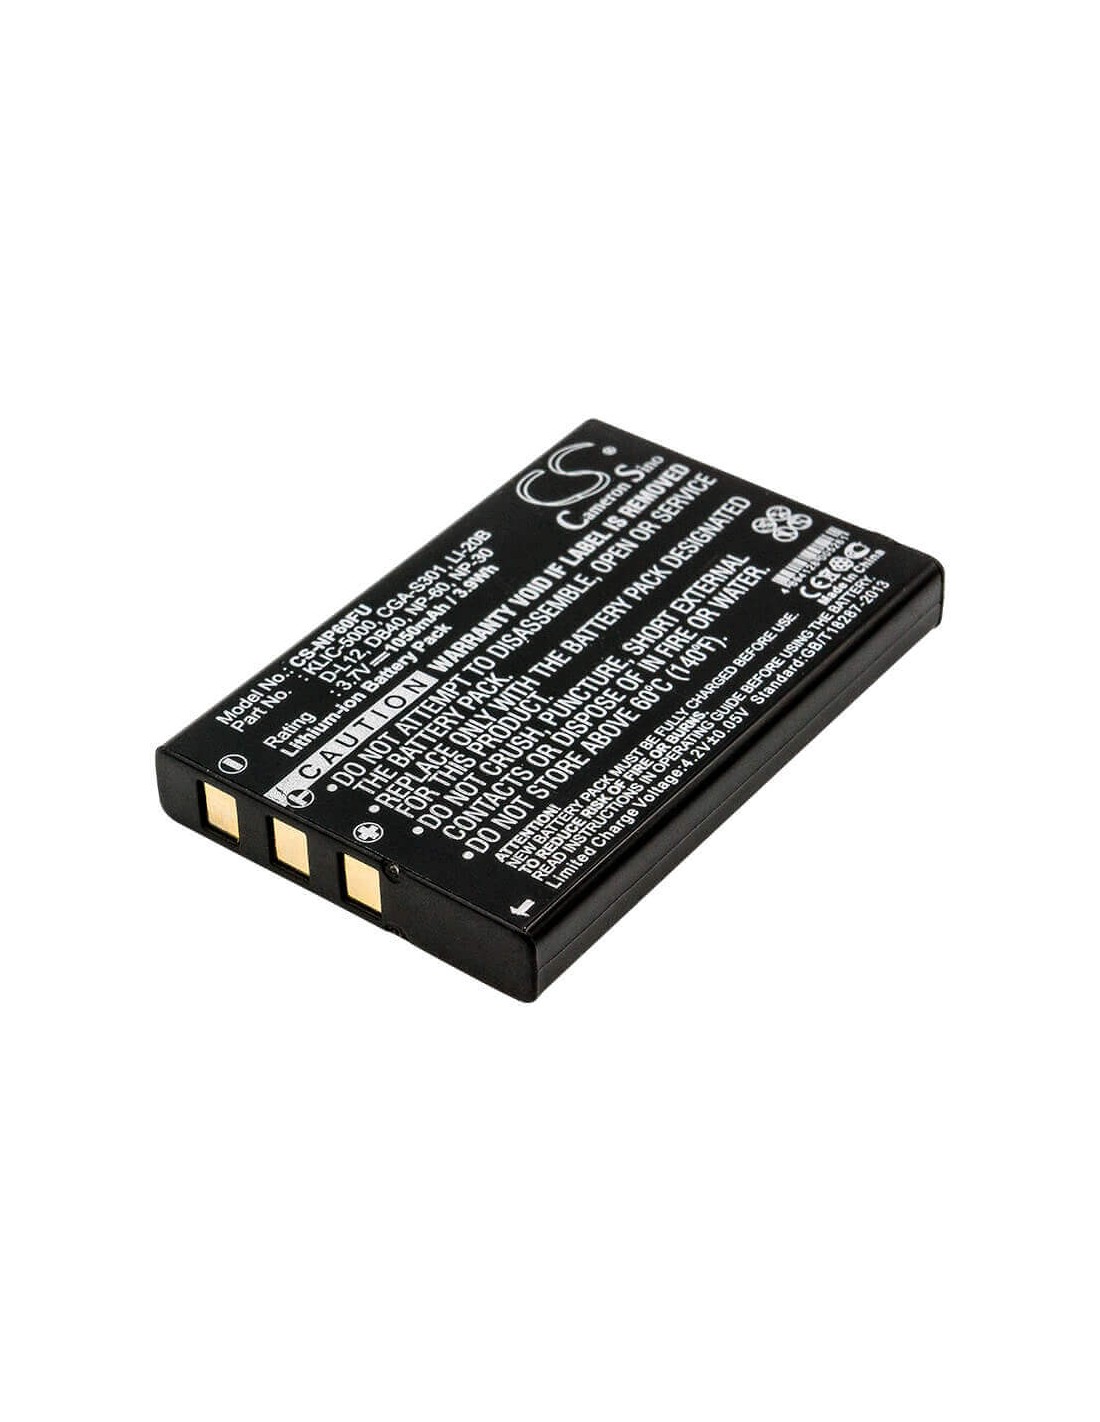 Battery for Maginon Dc-5300, Dc-5350, Dc-5390, Dc-6300 3.7V, 1050mAh - 3.89Wh